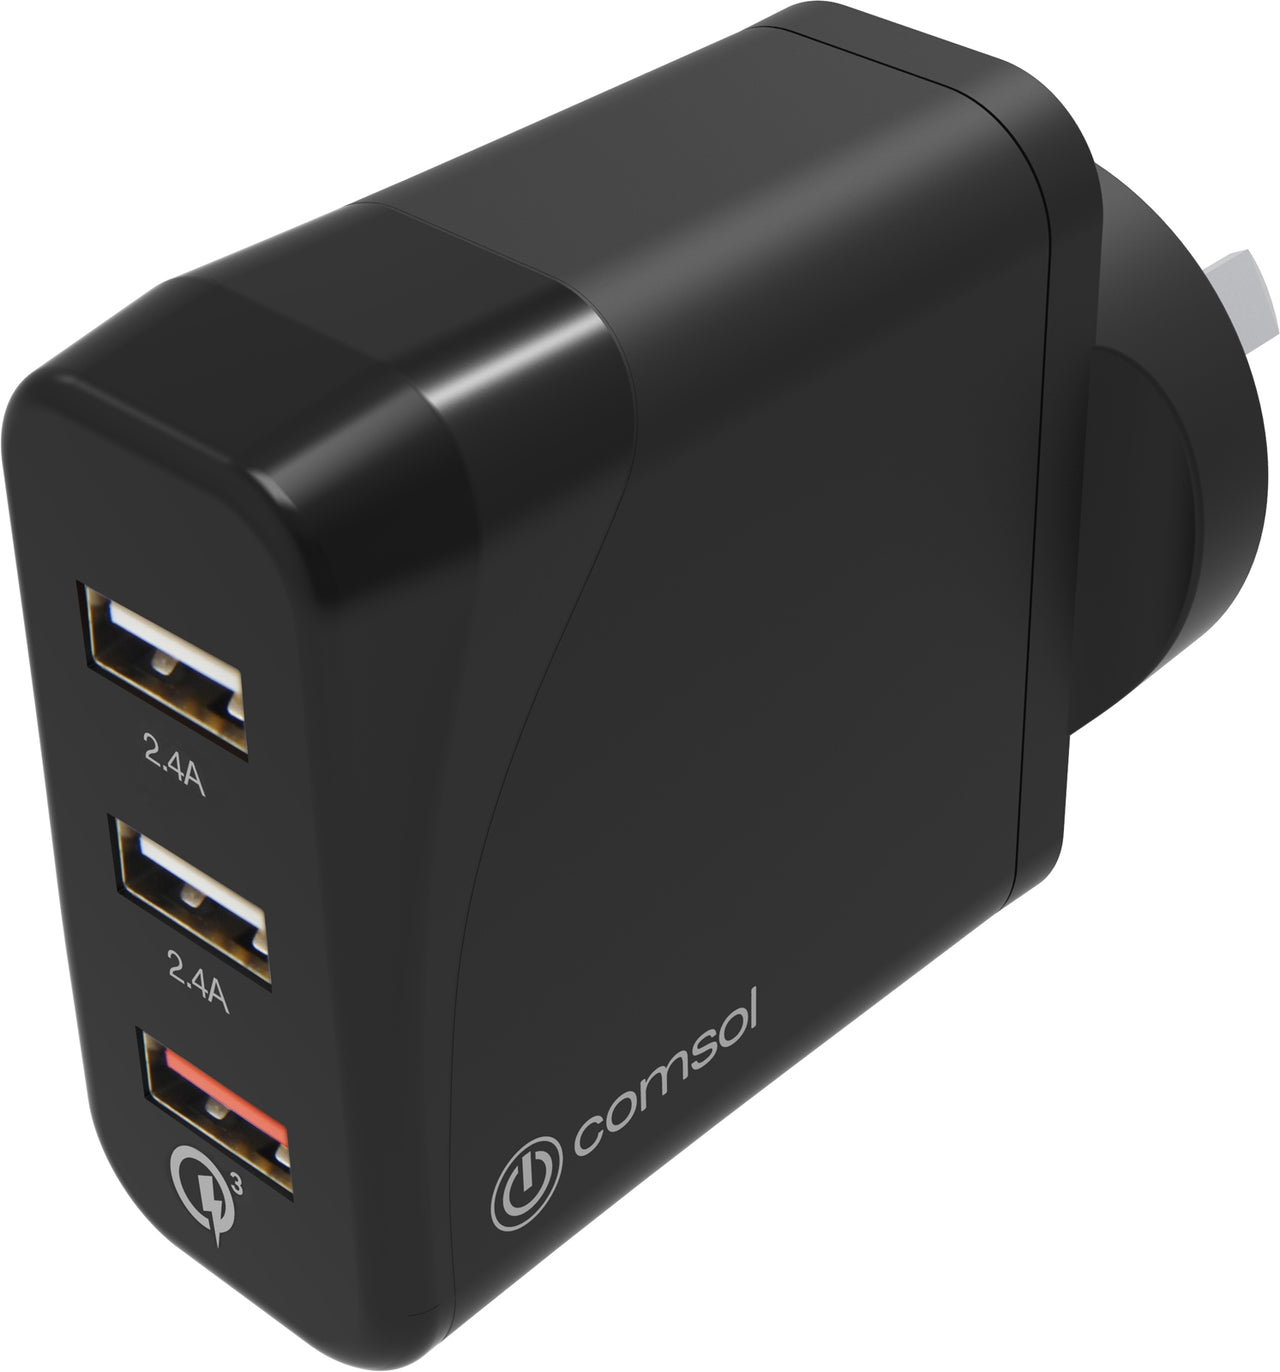 Comsol 3 Port USB Wall Charger with QC 3.0 (30W) - Black